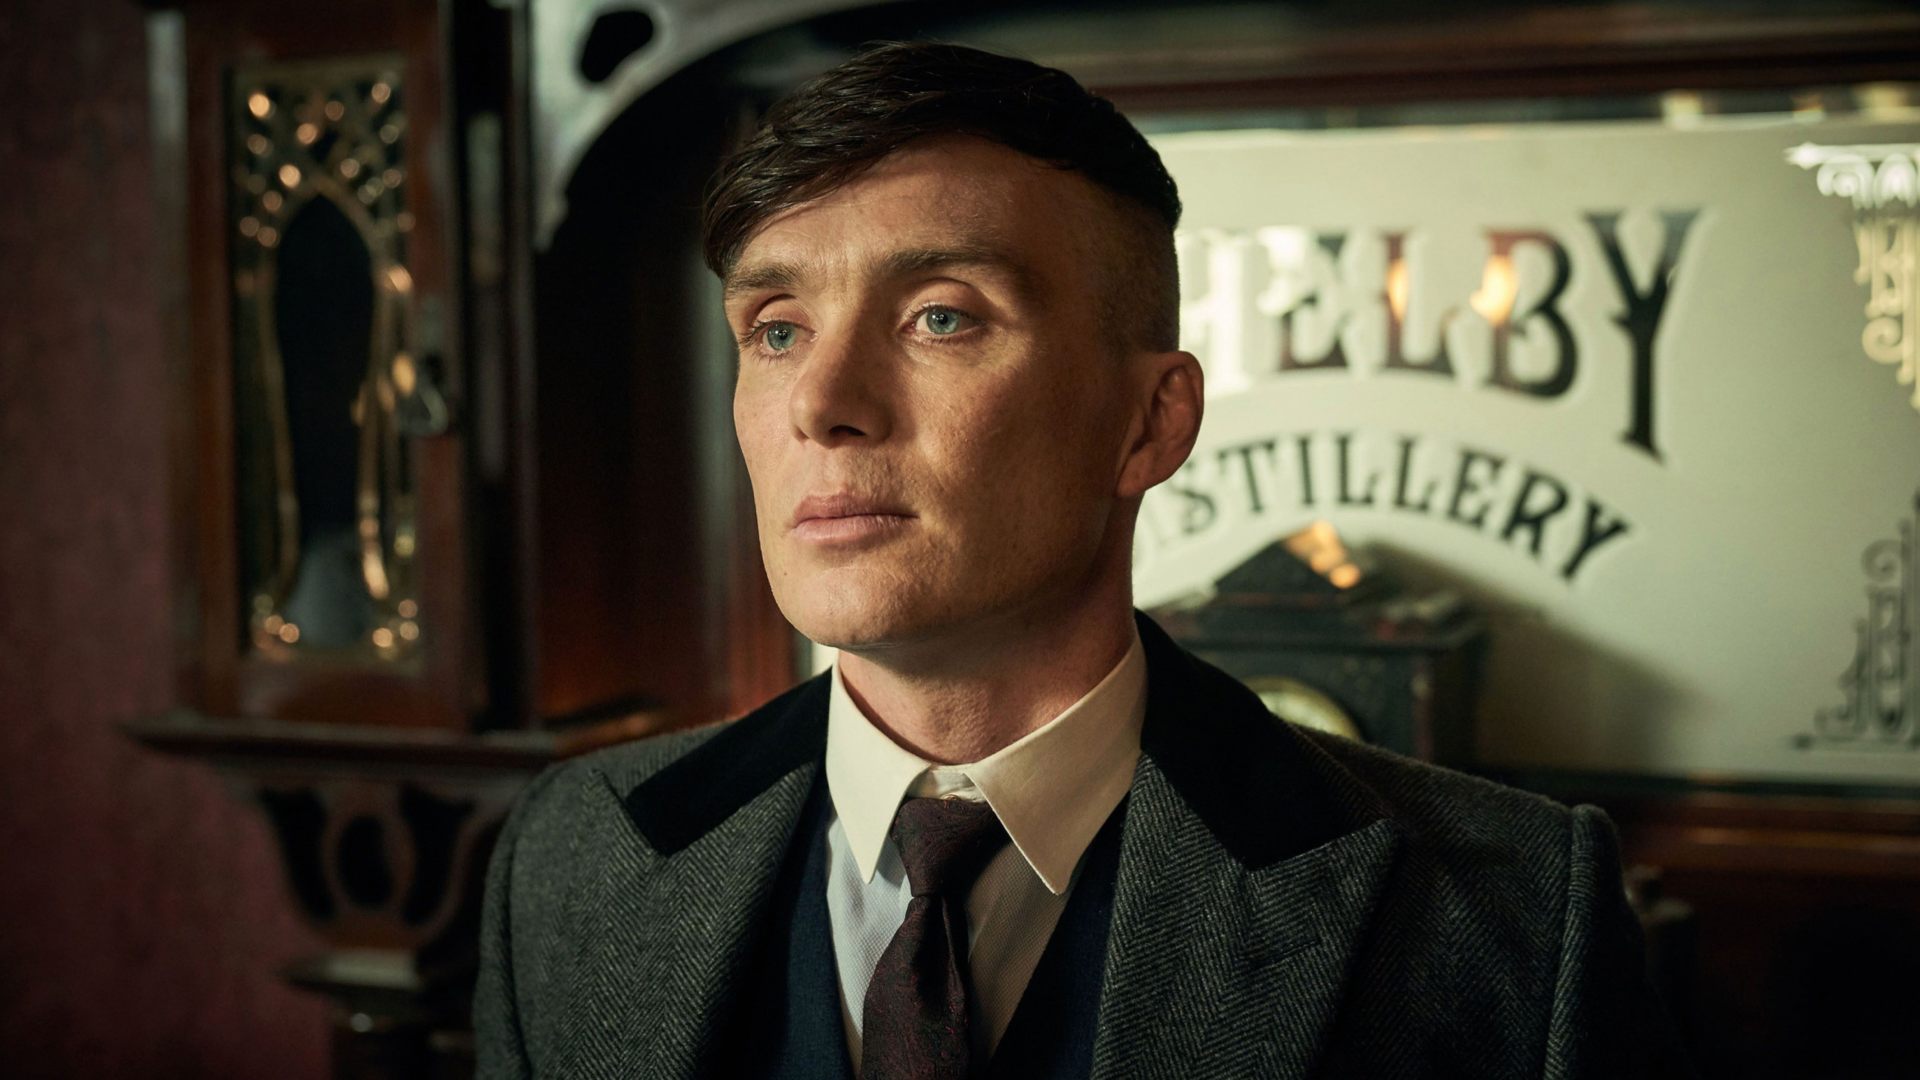 Peaky Blinders Cast: Top 10 Shocking Facts You Should Know!